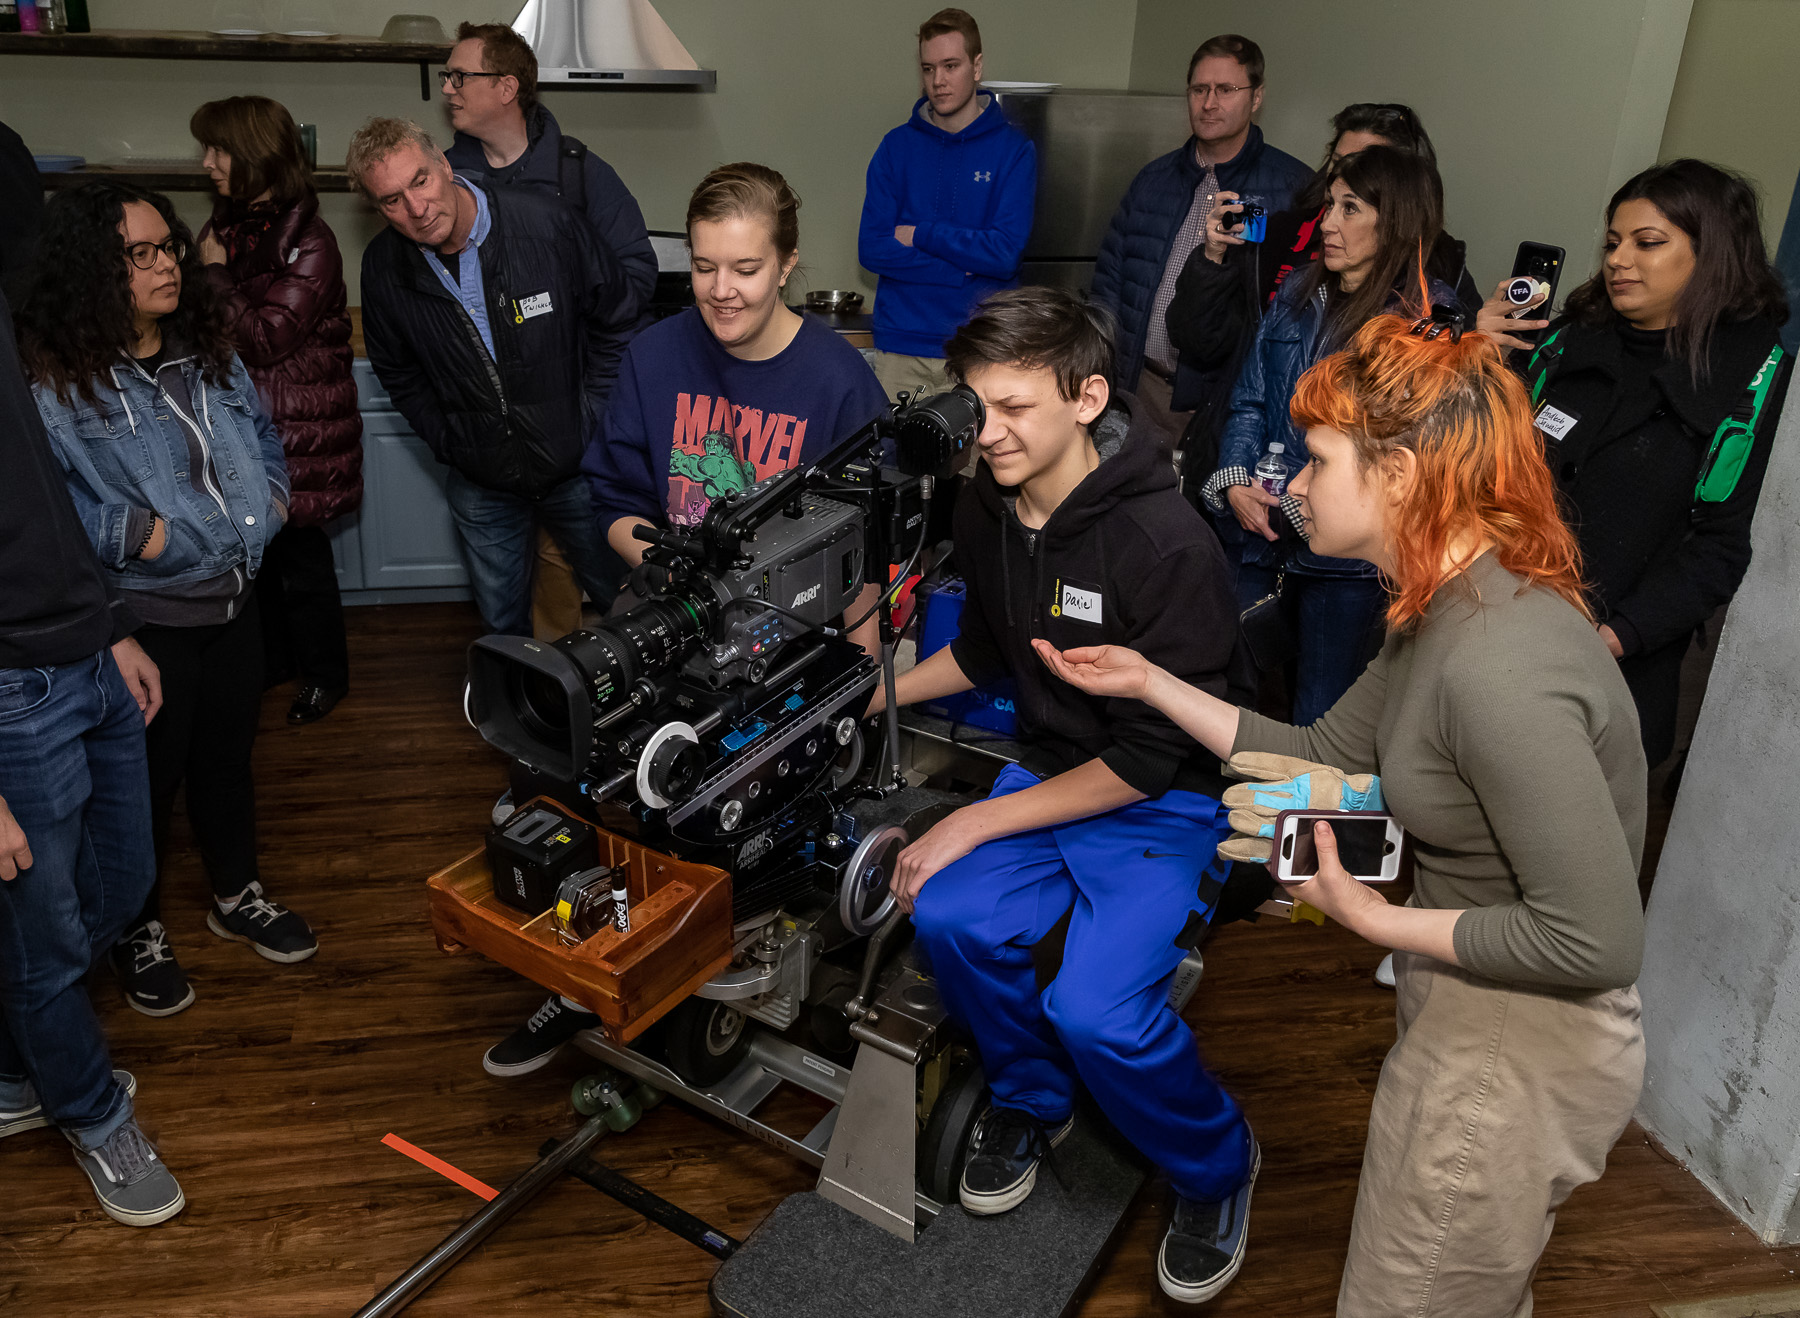 Attendees try out film equipment during the Chicago Ideas Week Lab: Behind the Scenes at Cinespace with DePaul University, Monday, Oct. 14, 2019, at Cinespace Chicago Film Studios on Chicago’s West Side. (DePaul University/Jeff Carrion)